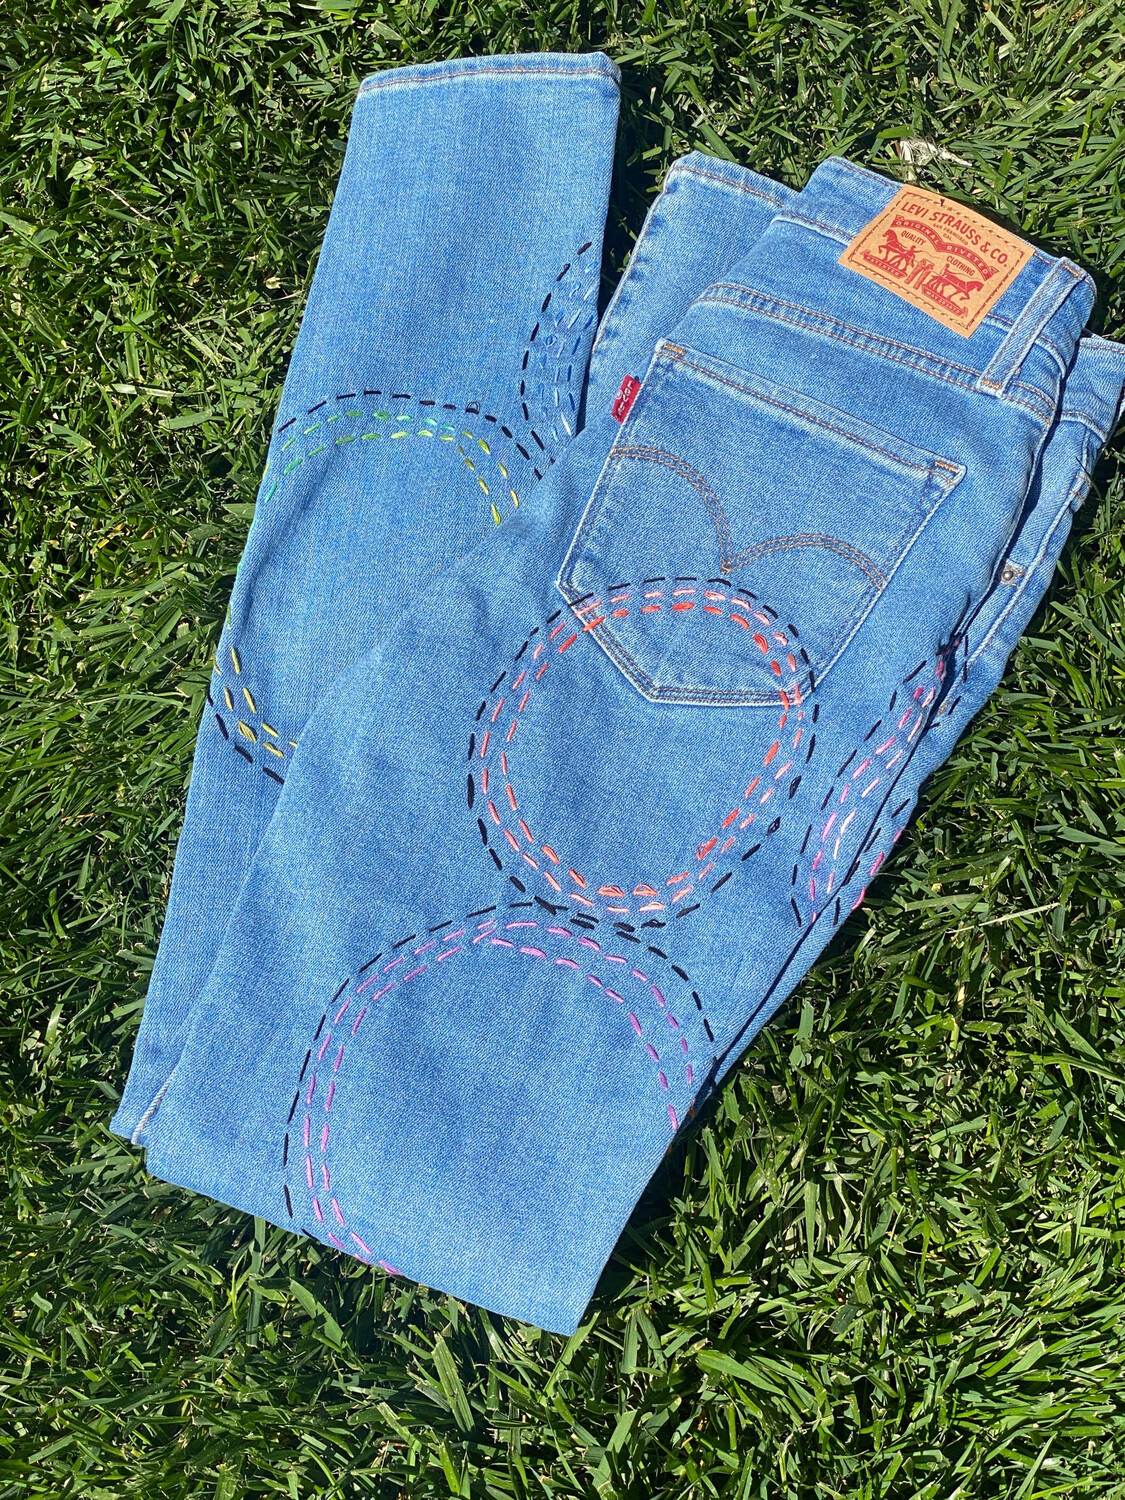 ESIAAM Levi's Embroidered "Free Spirit" Jeans 26 